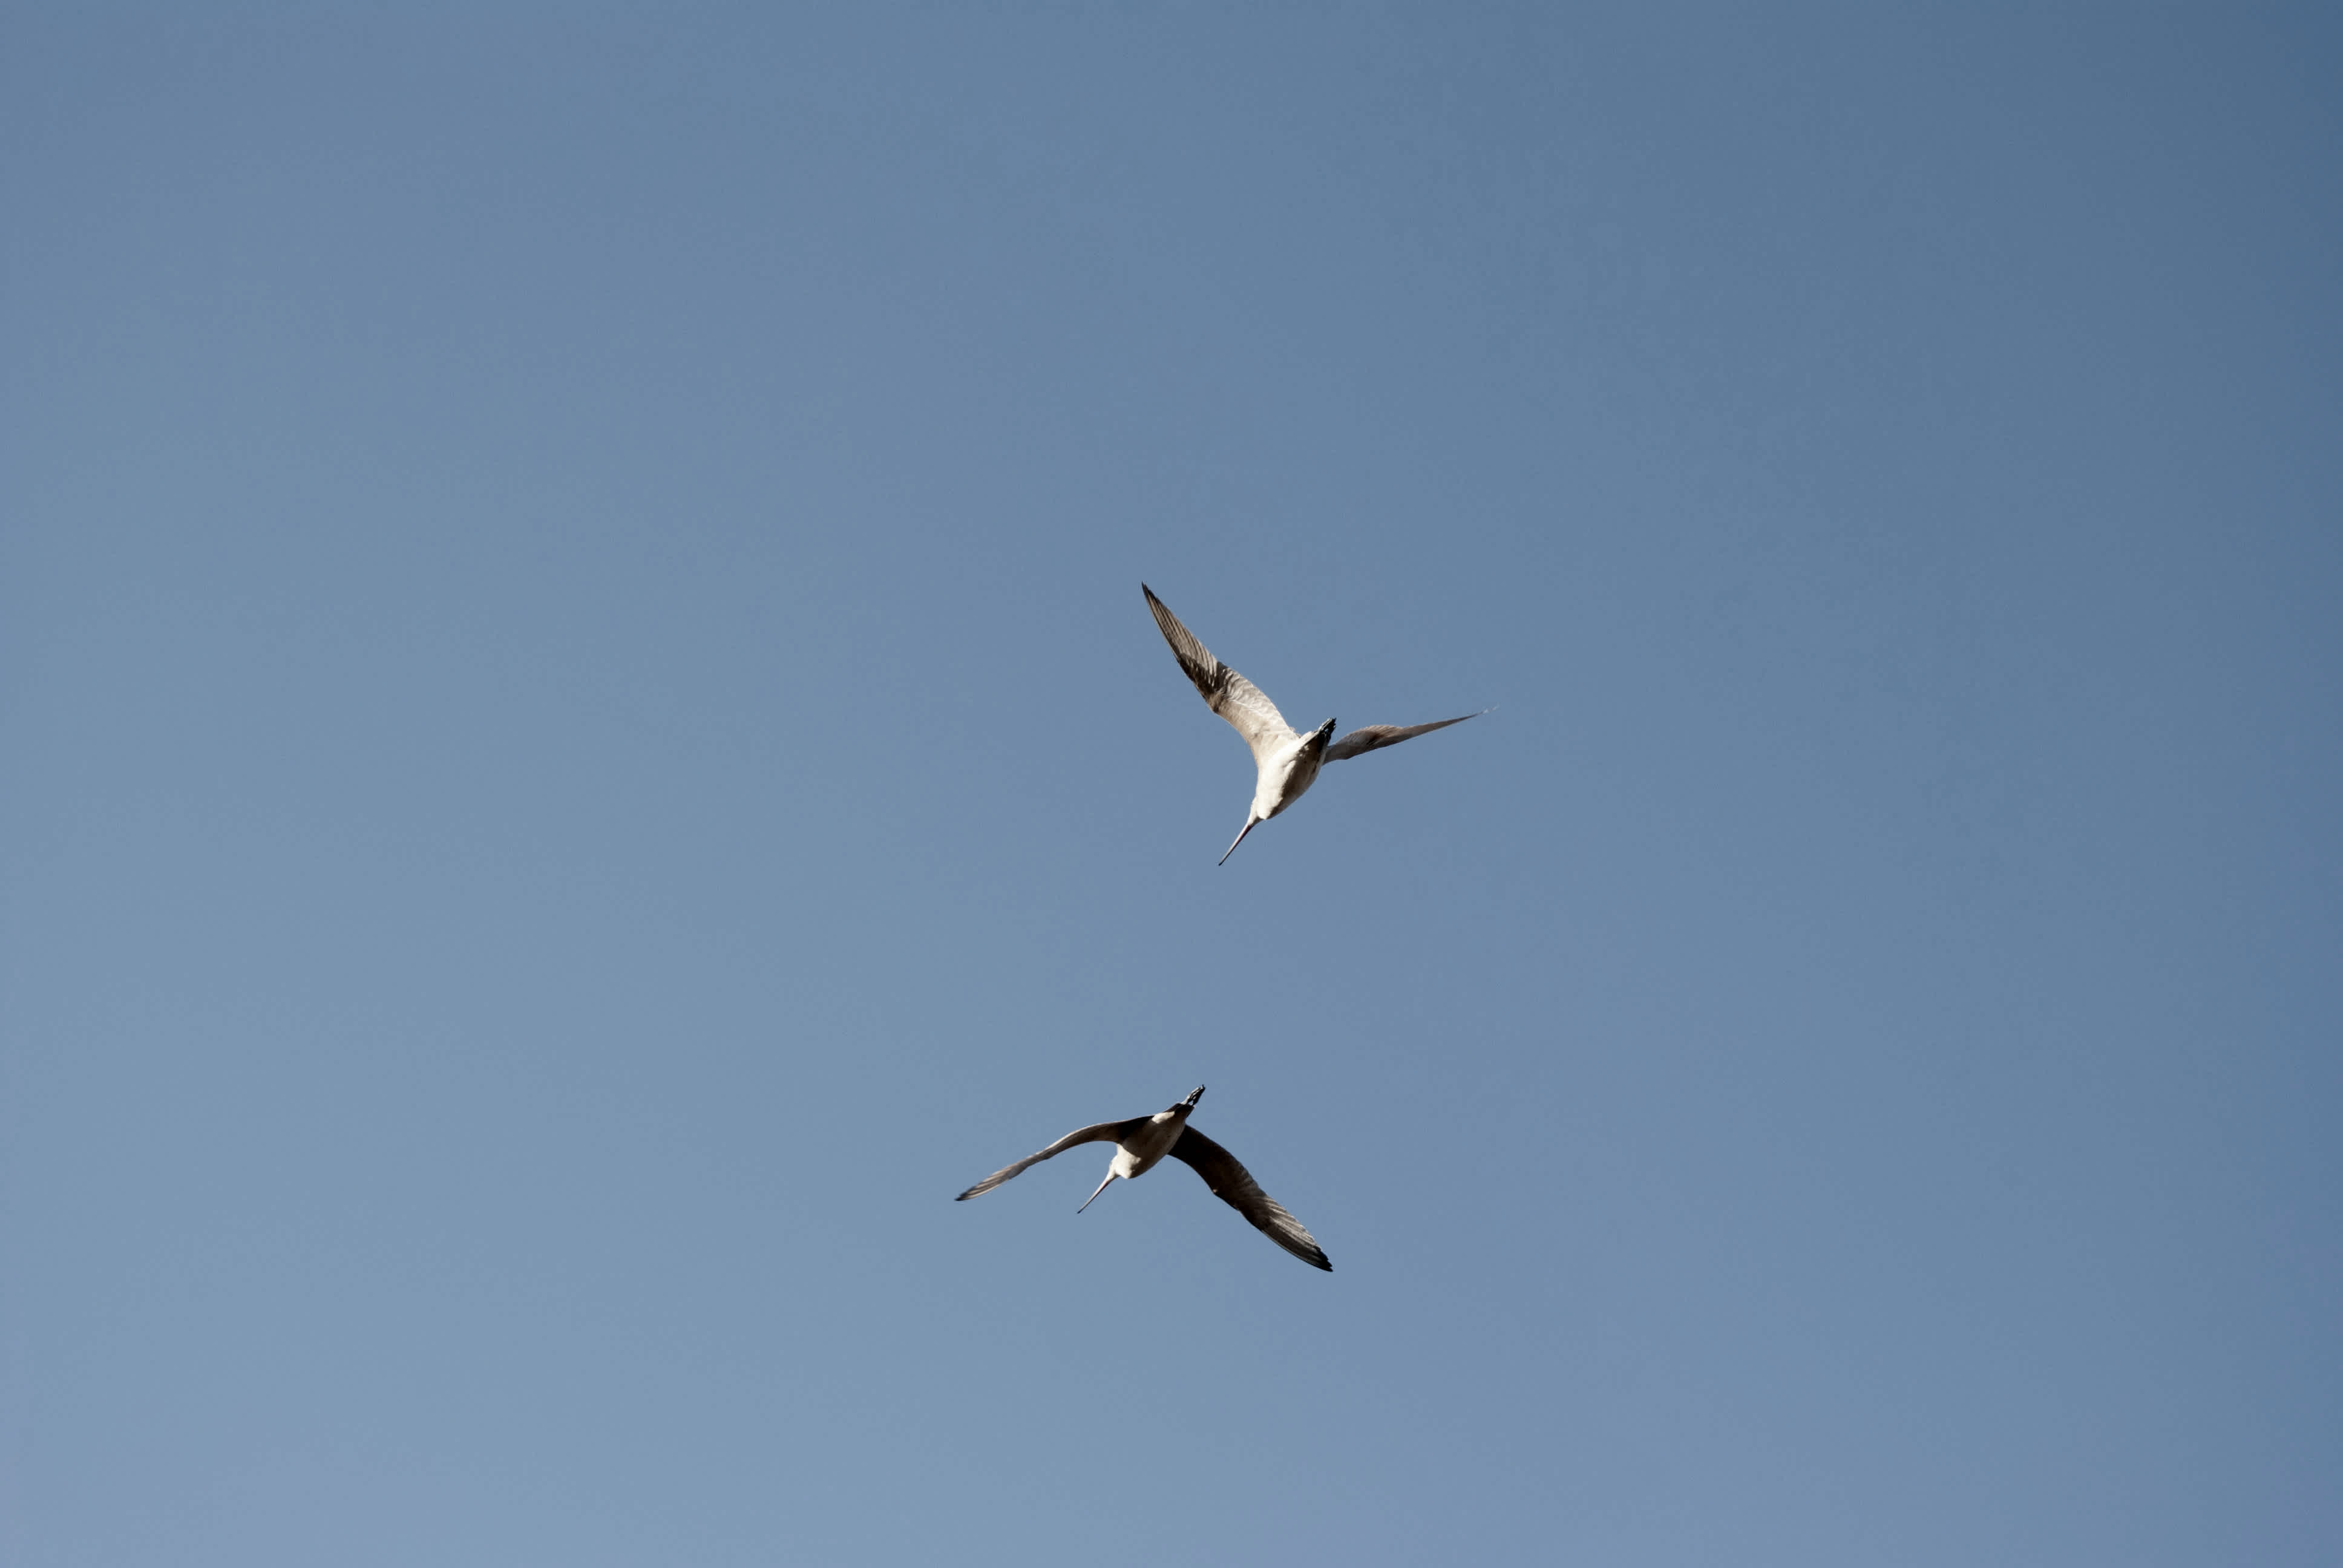 Two birds flying in the sky.